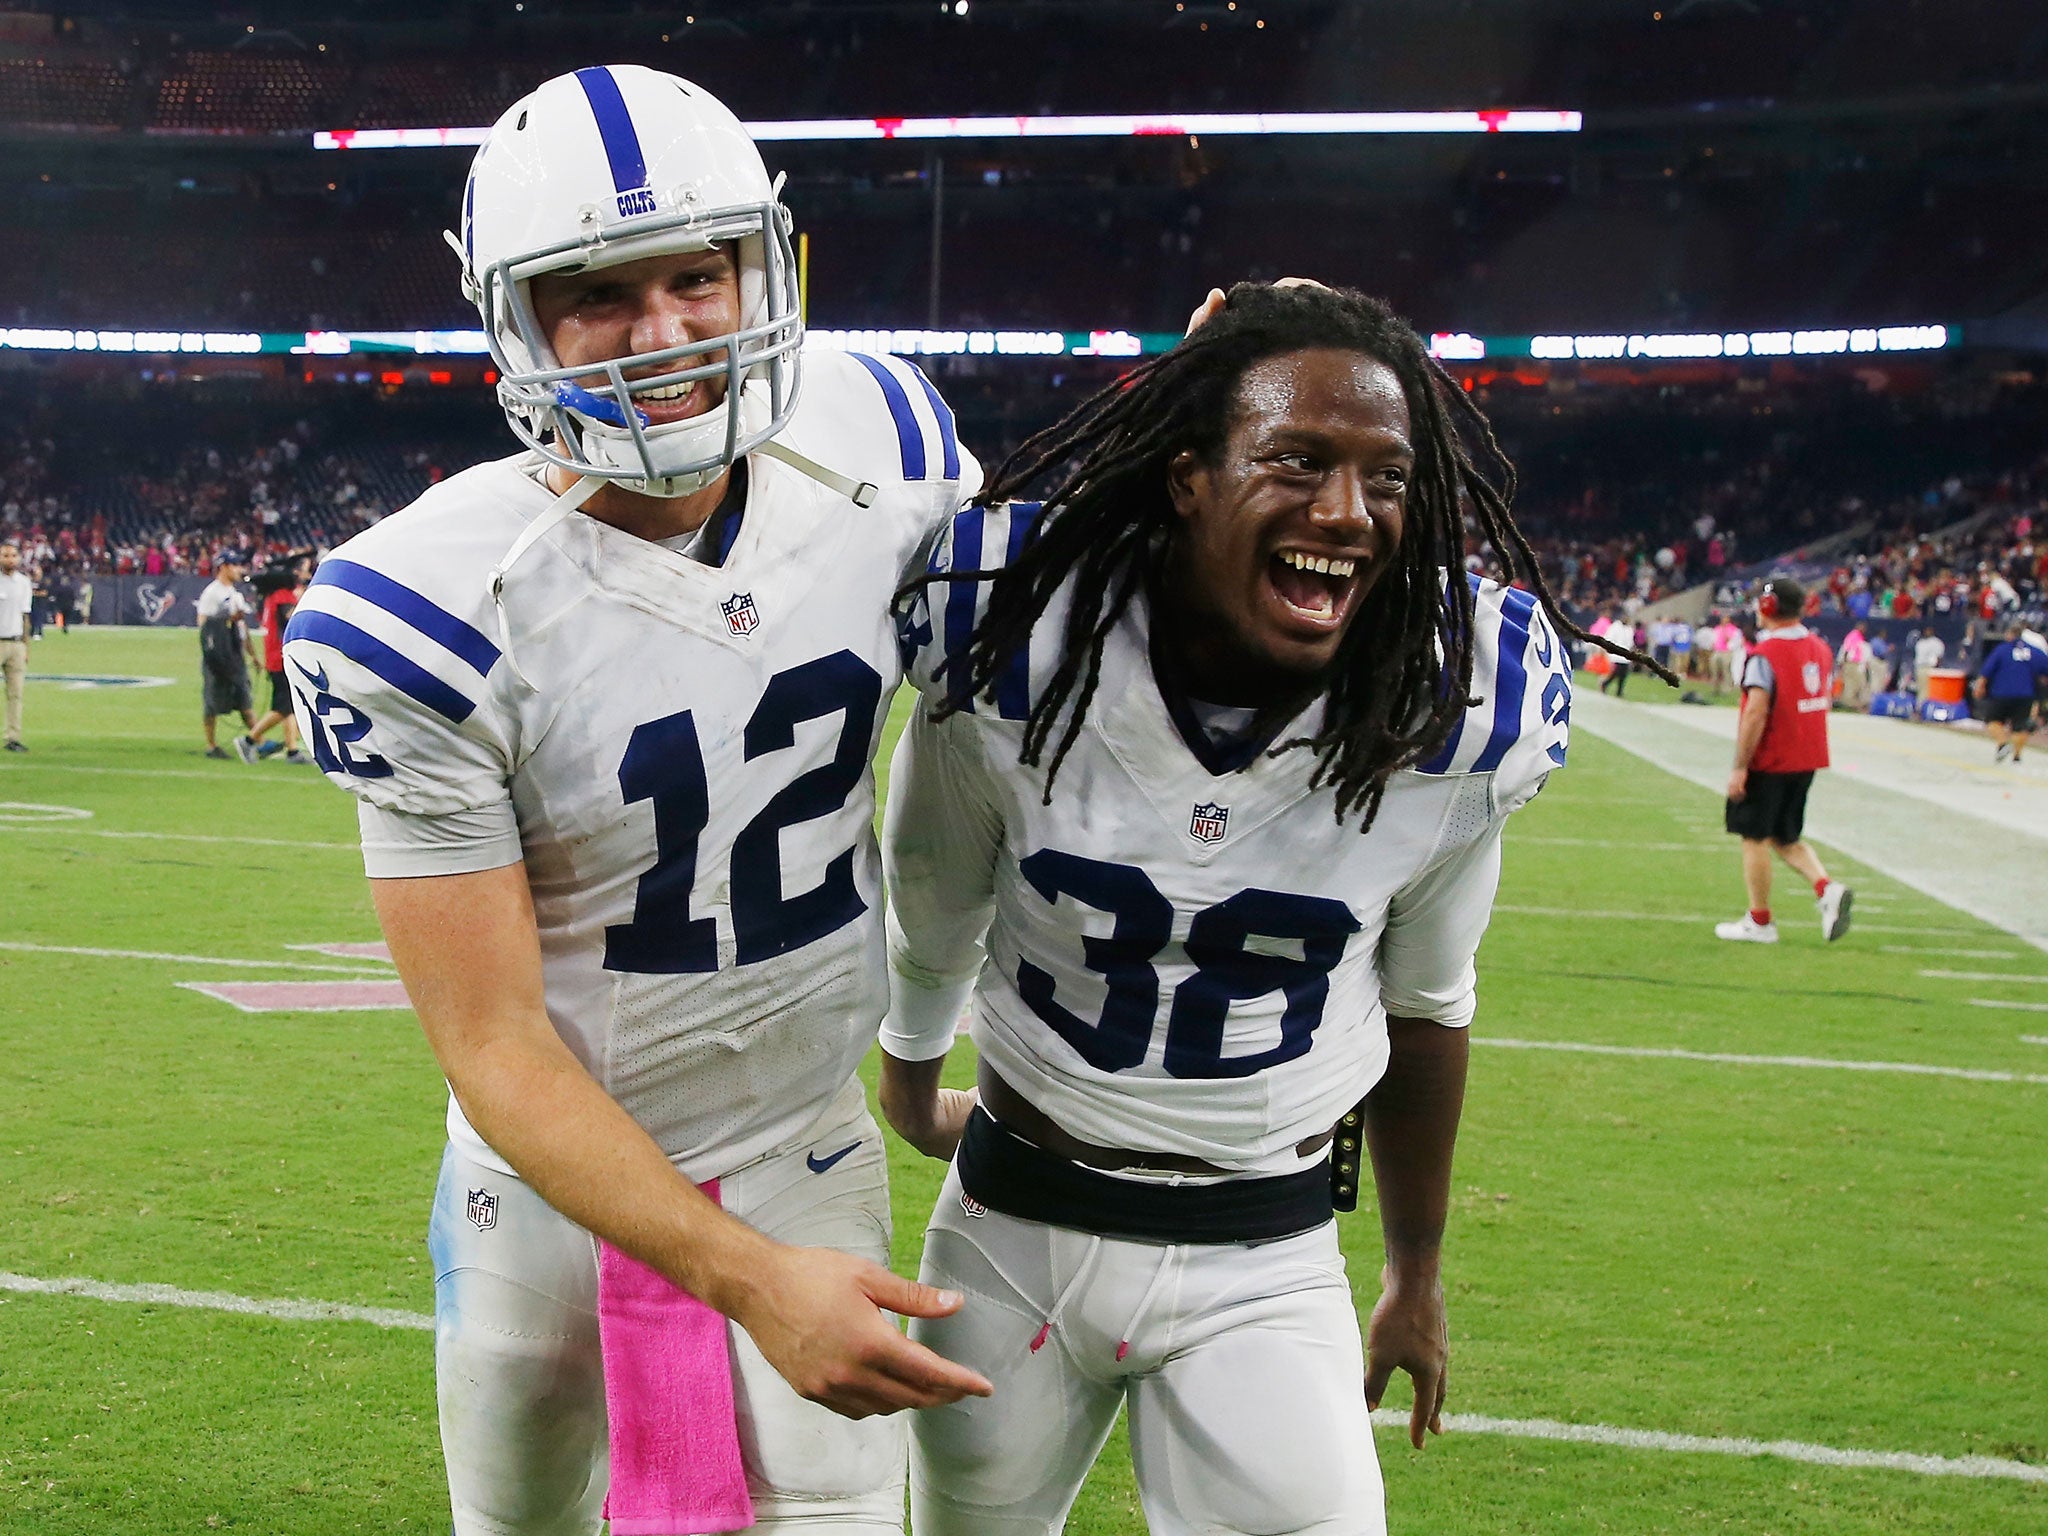 Andrew Luck and Sergio Brown celebrate the Indianapolis Colts' victory over the Houston Texans